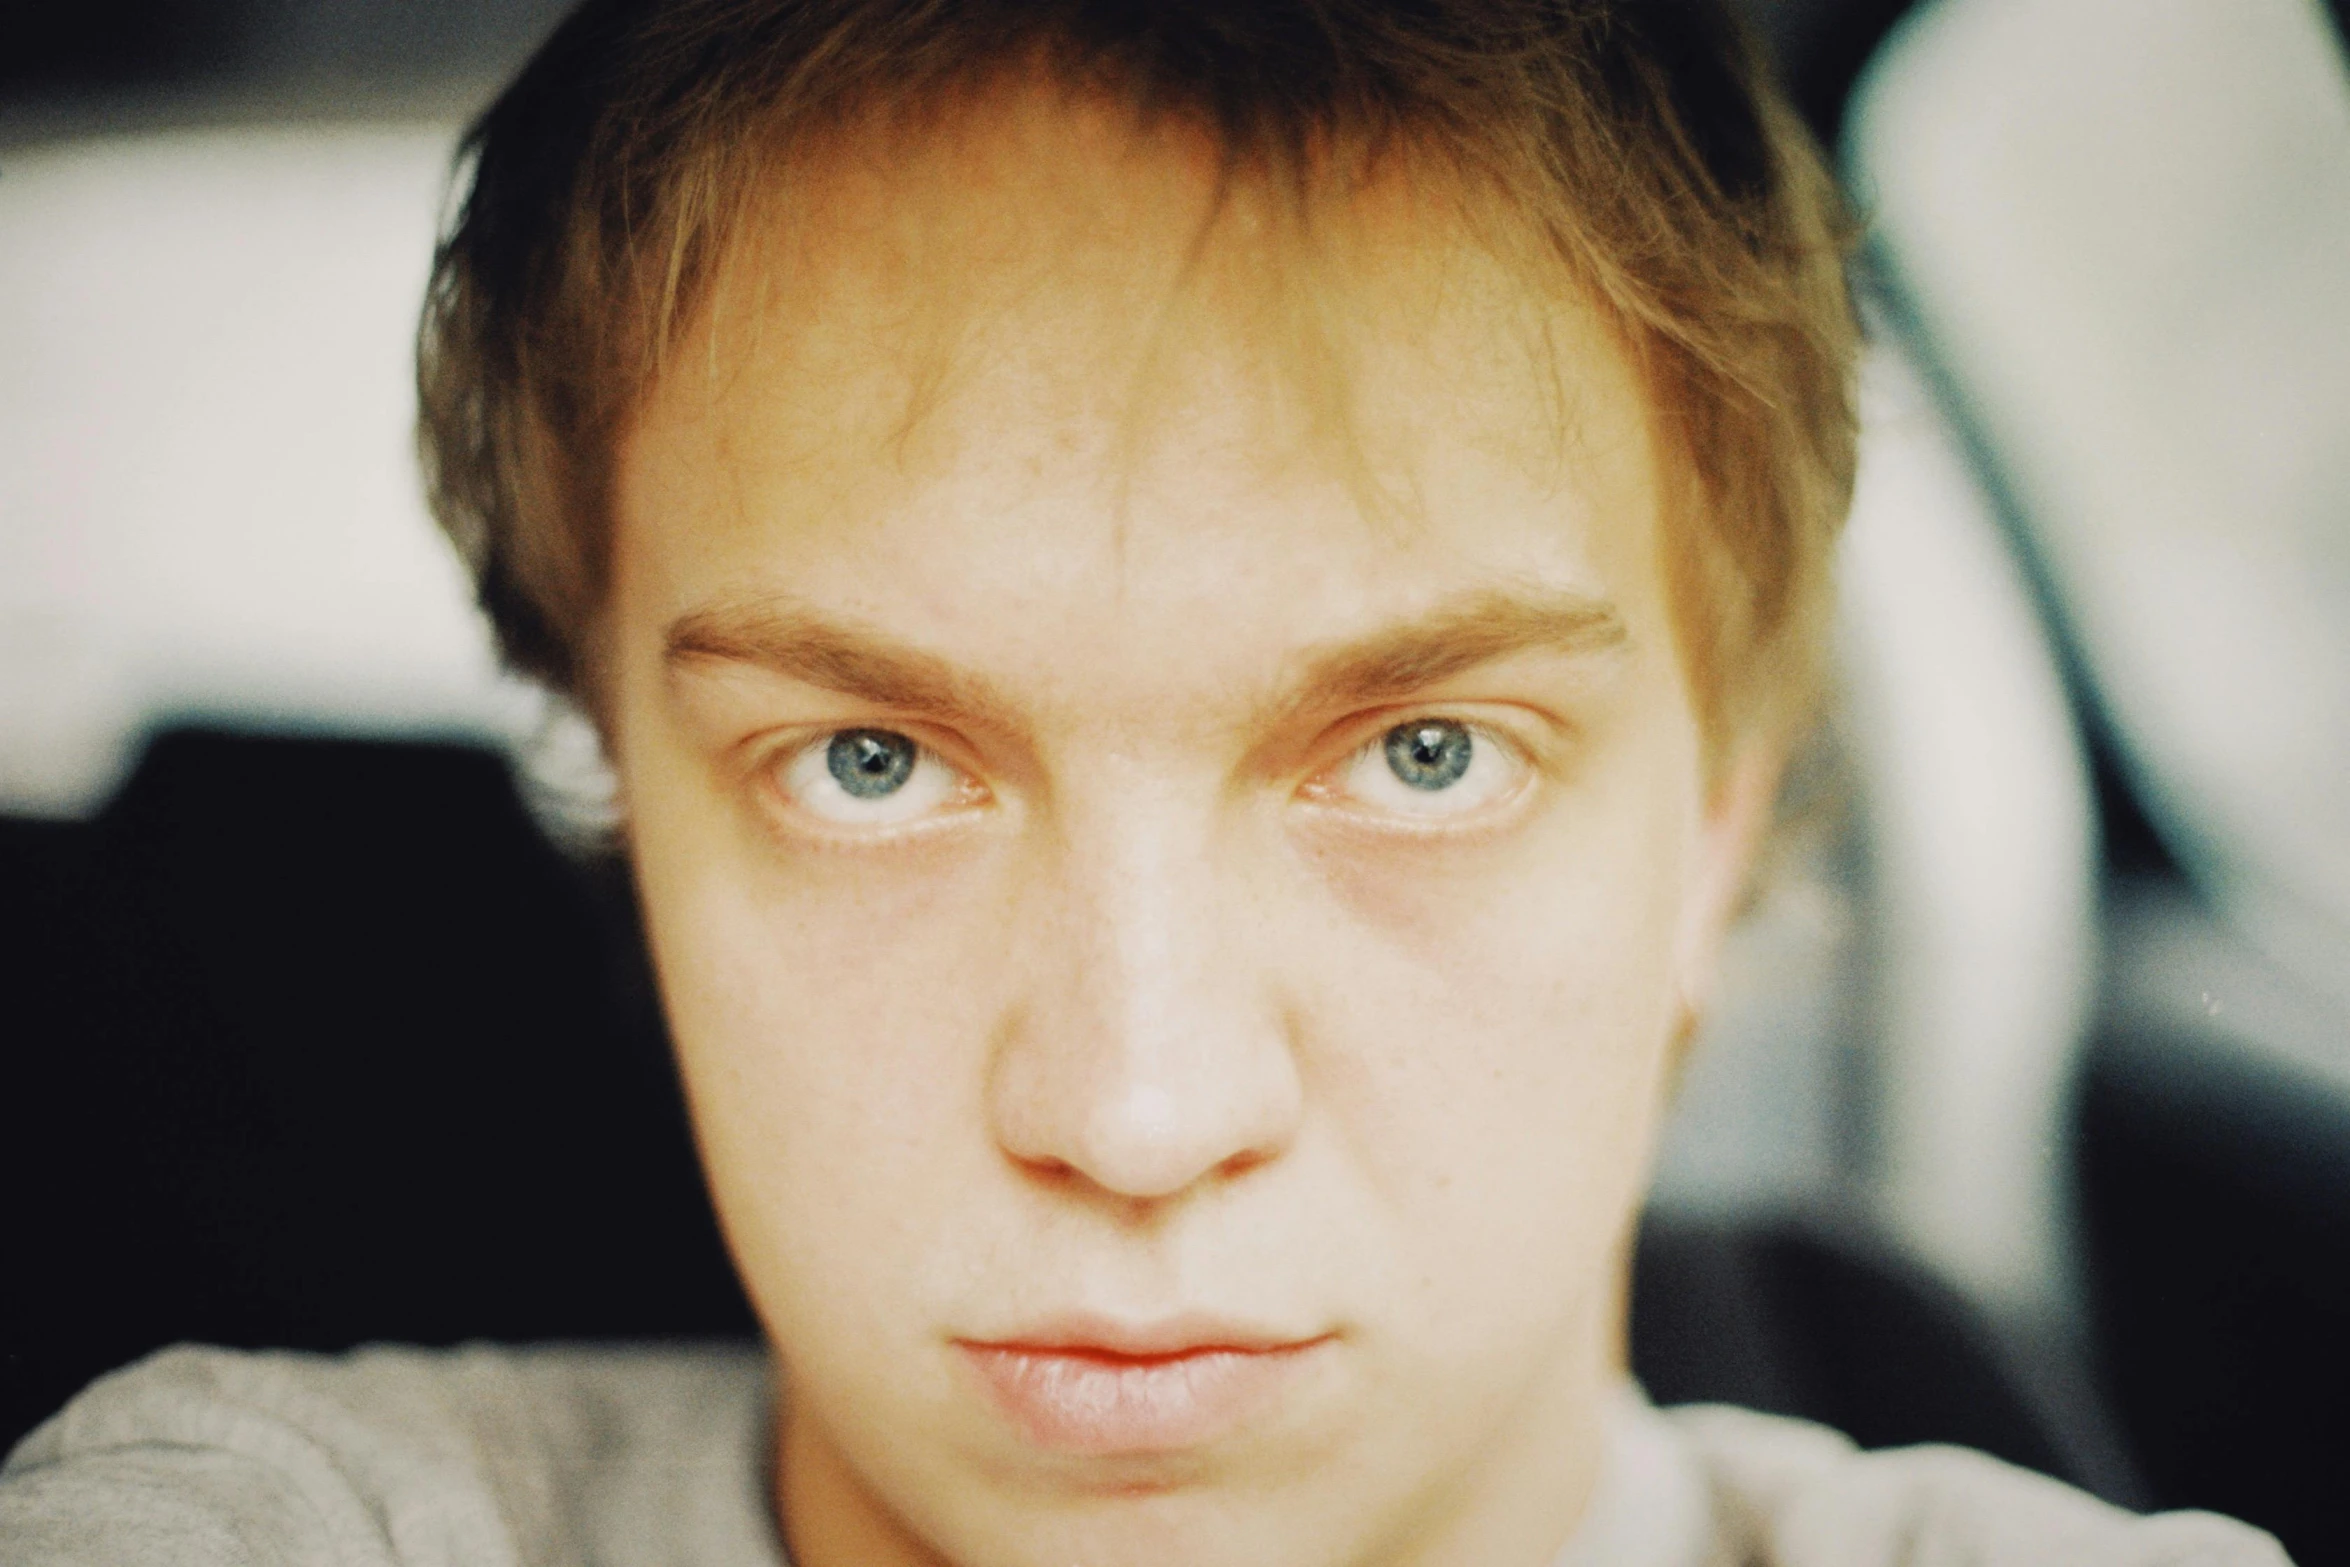 man staring into the camera with blue eyes